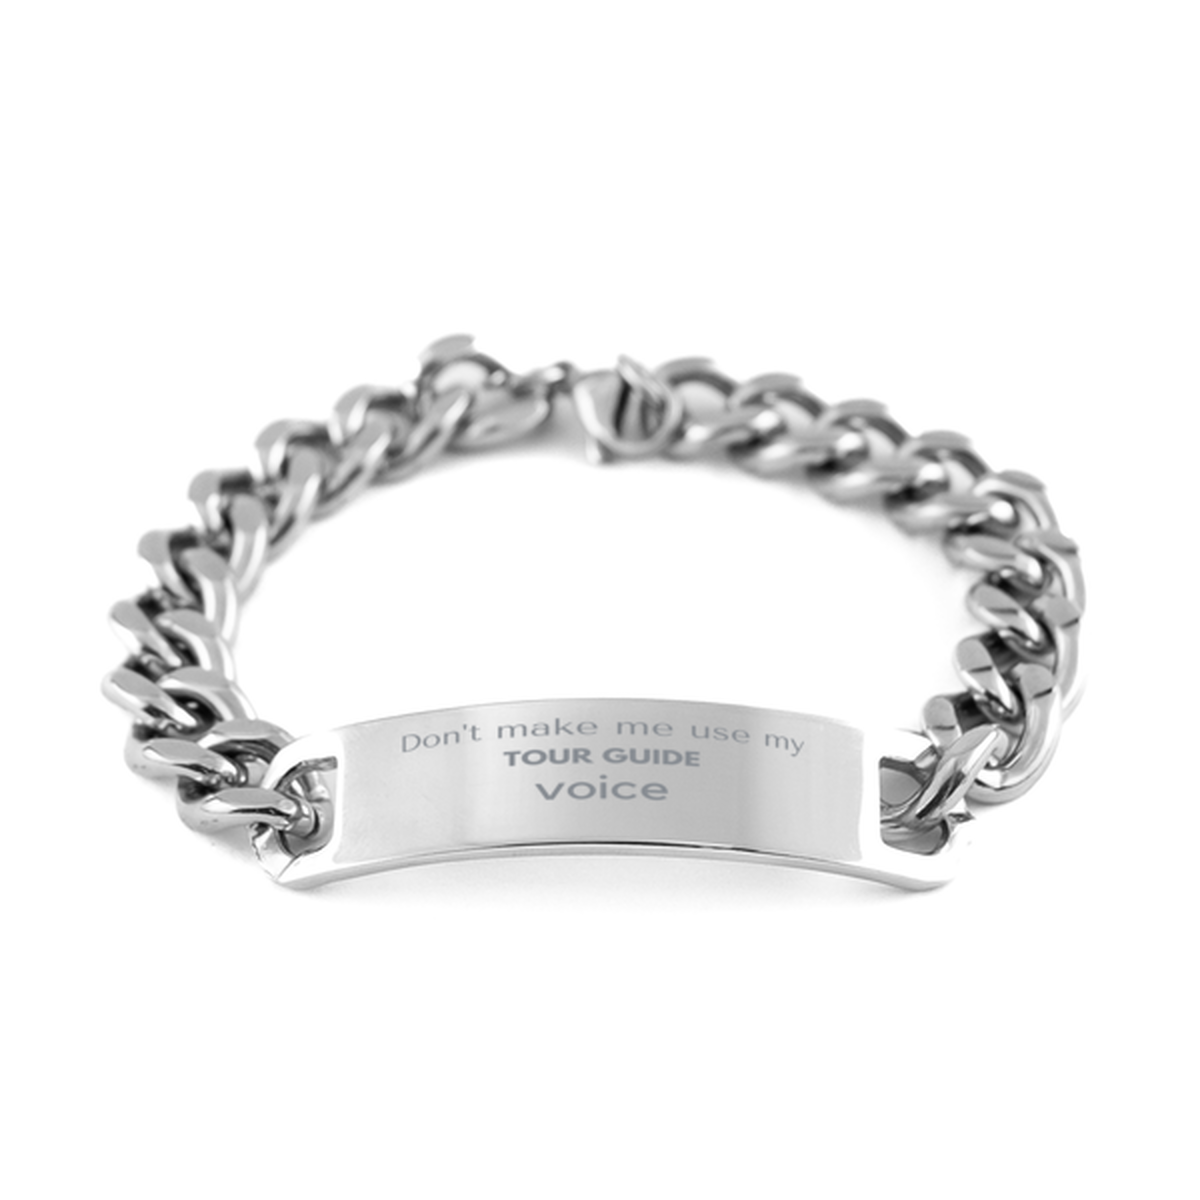 Don't make me use my Tour Guide voice, Sarcasm Tour Guide Gifts, Christmas Tour Guide Cuban Chain Stainless Steel Bracelet Birthday Unique Gifts For Tour Guide Coworkers, Men, Women, Colleague, Friends